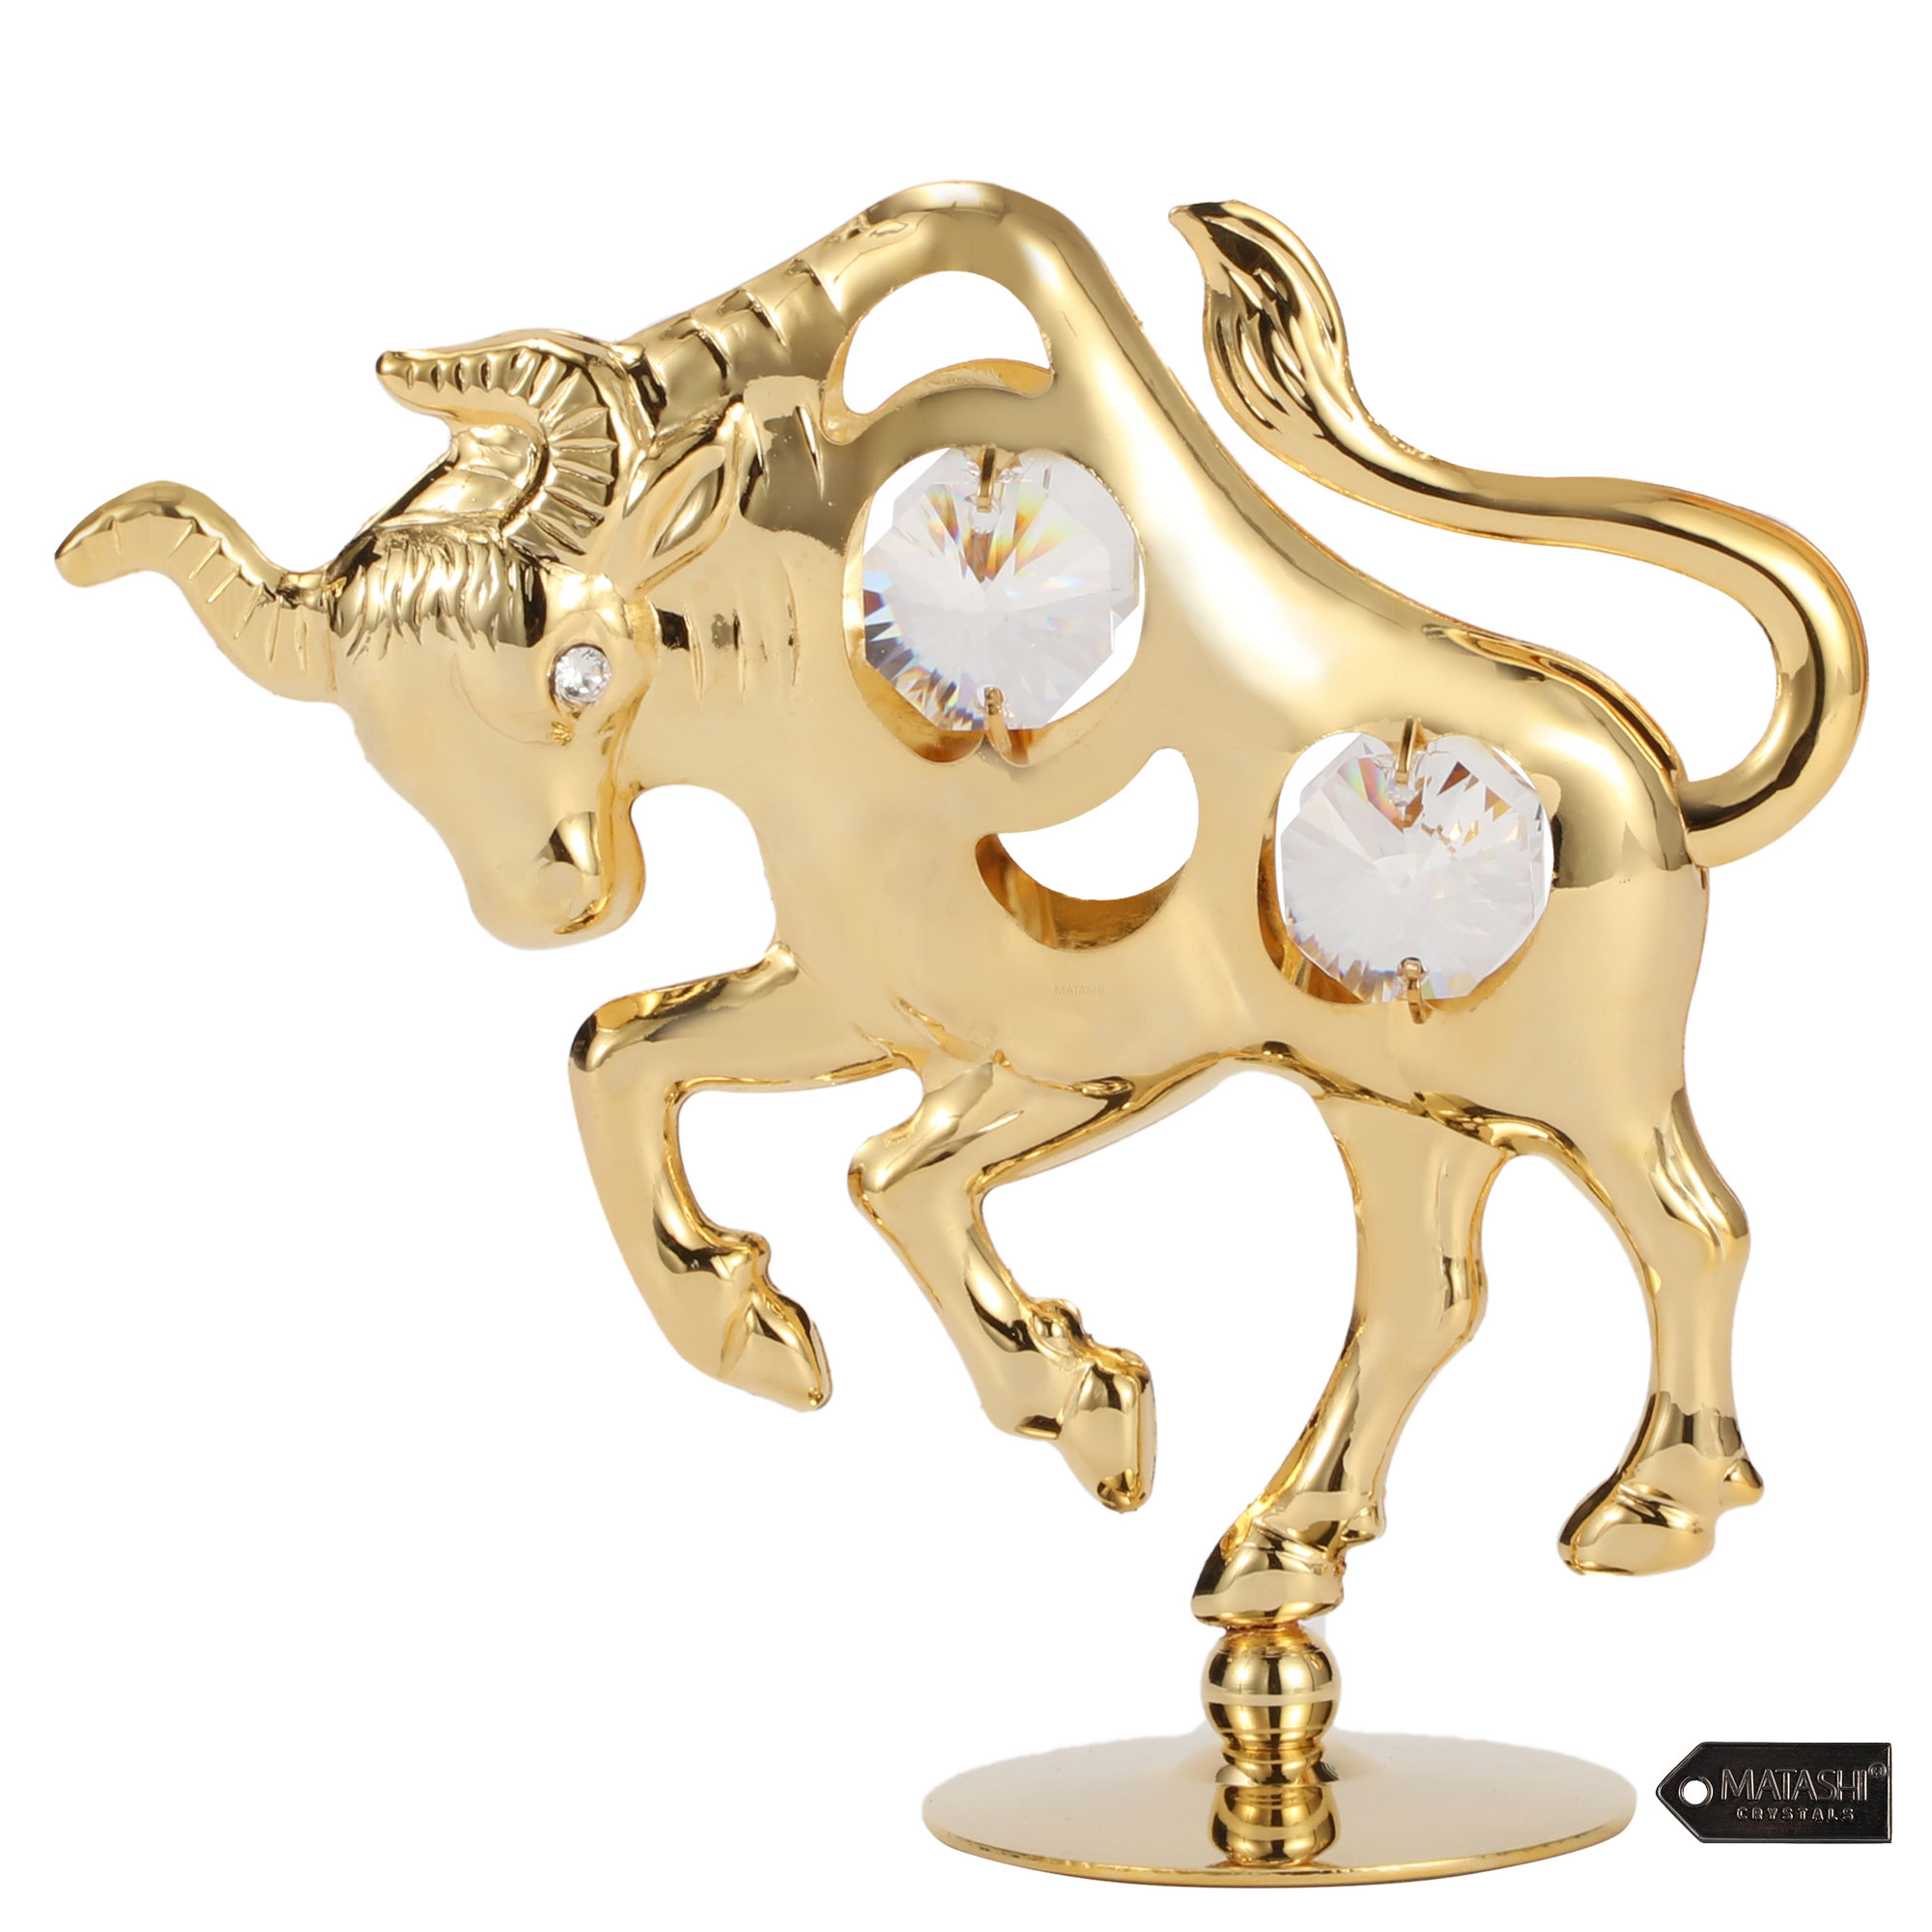 Matashi 24K Gold Plated Crystal Studded Ox/Bull Figurine Ornament ,Home Decoration Collectible Ornament Gift, Ox Wealth Statue Figurine